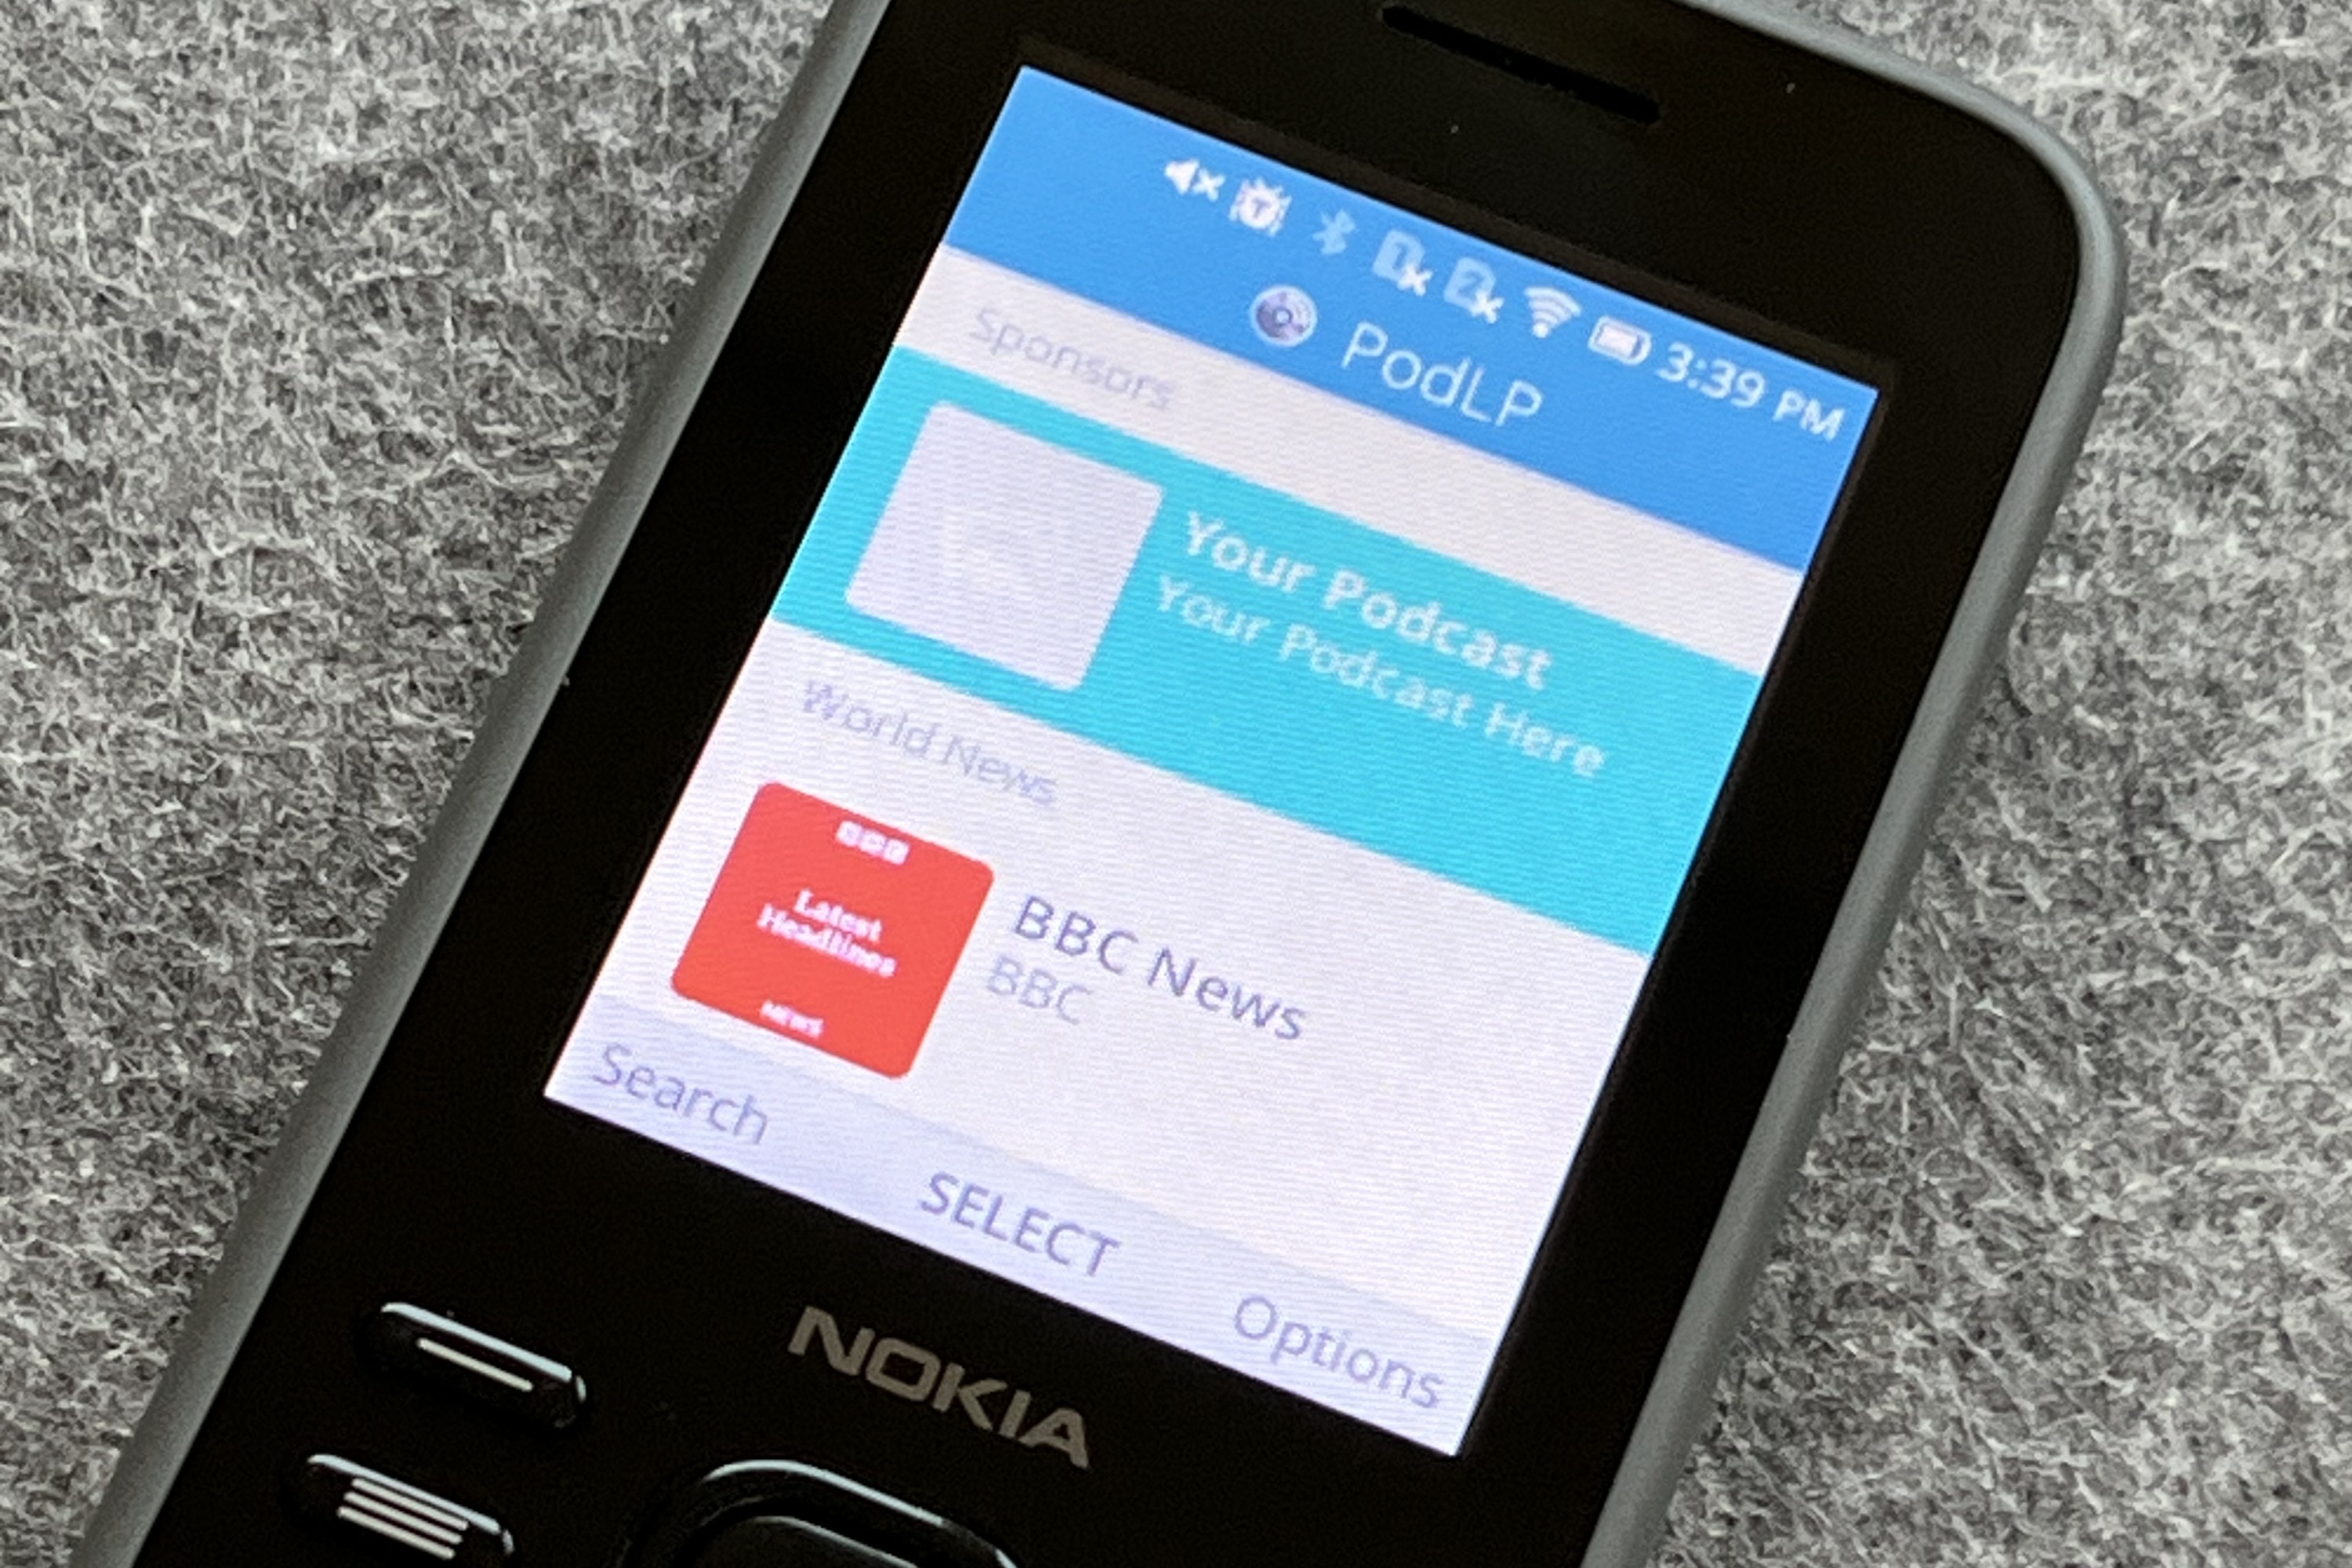 Nokia 6300 4G - Advertise your Podcast on PodLP